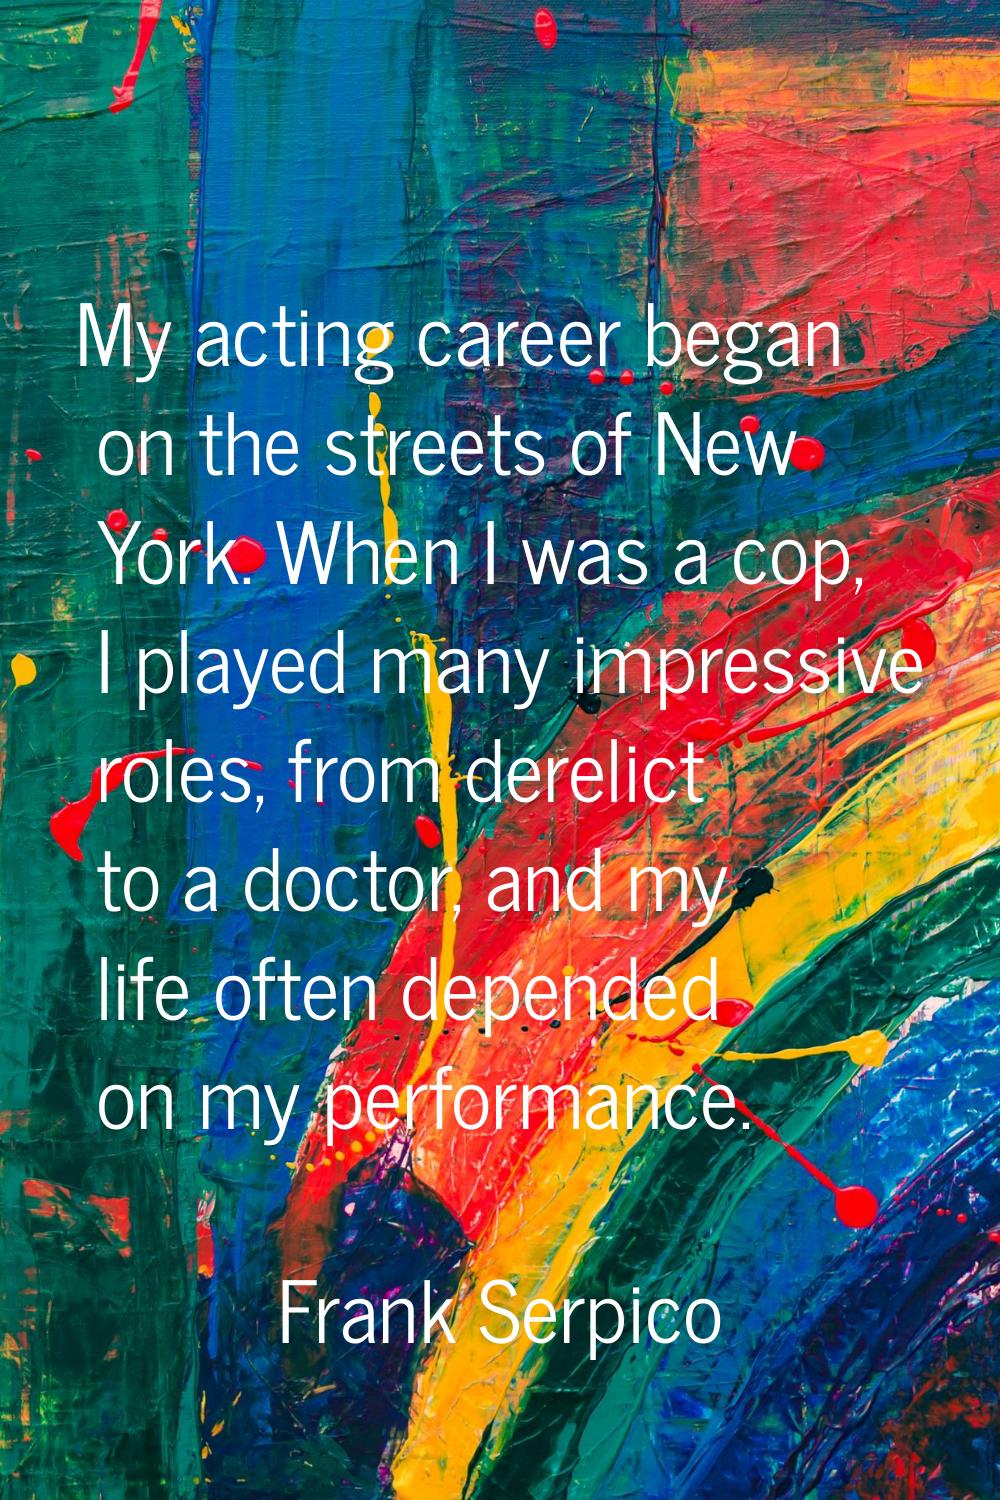 My acting career began on the streets of New York. When I was a cop, I played many impressive roles